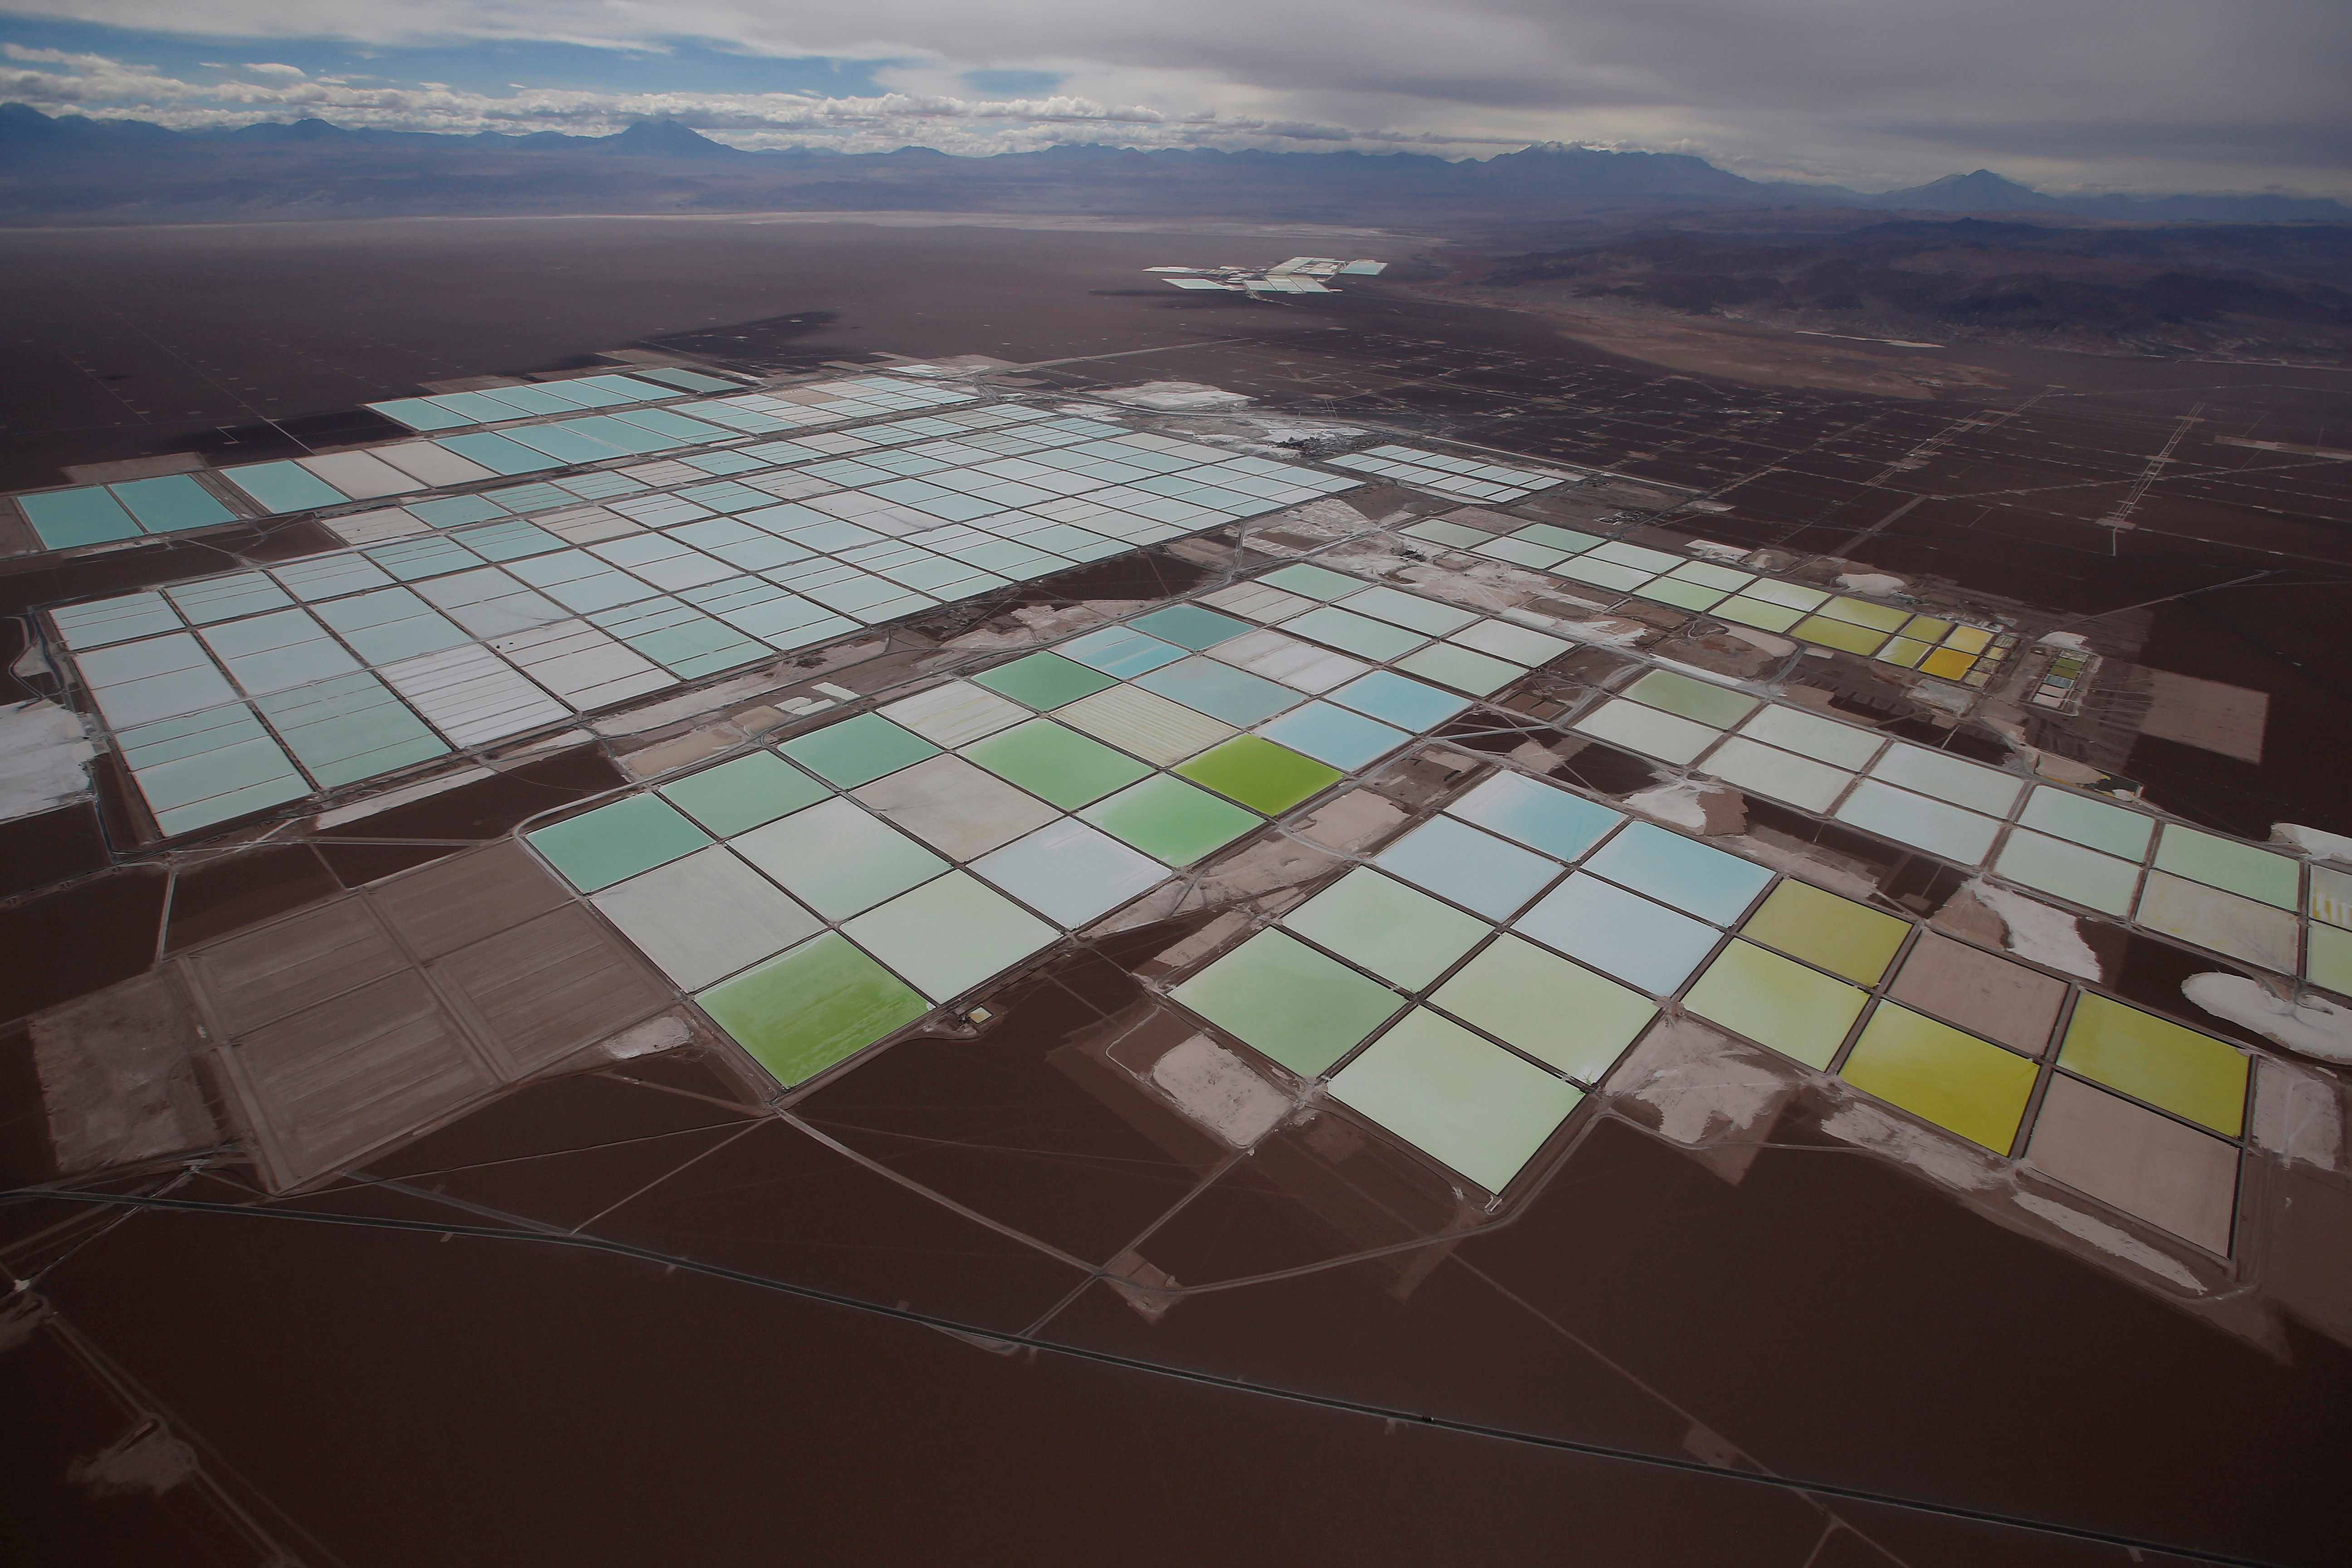 Aerial view shows the brine pools of SQM lithium mine on the Atacama salt flat in the Atacama desert of northern Chile